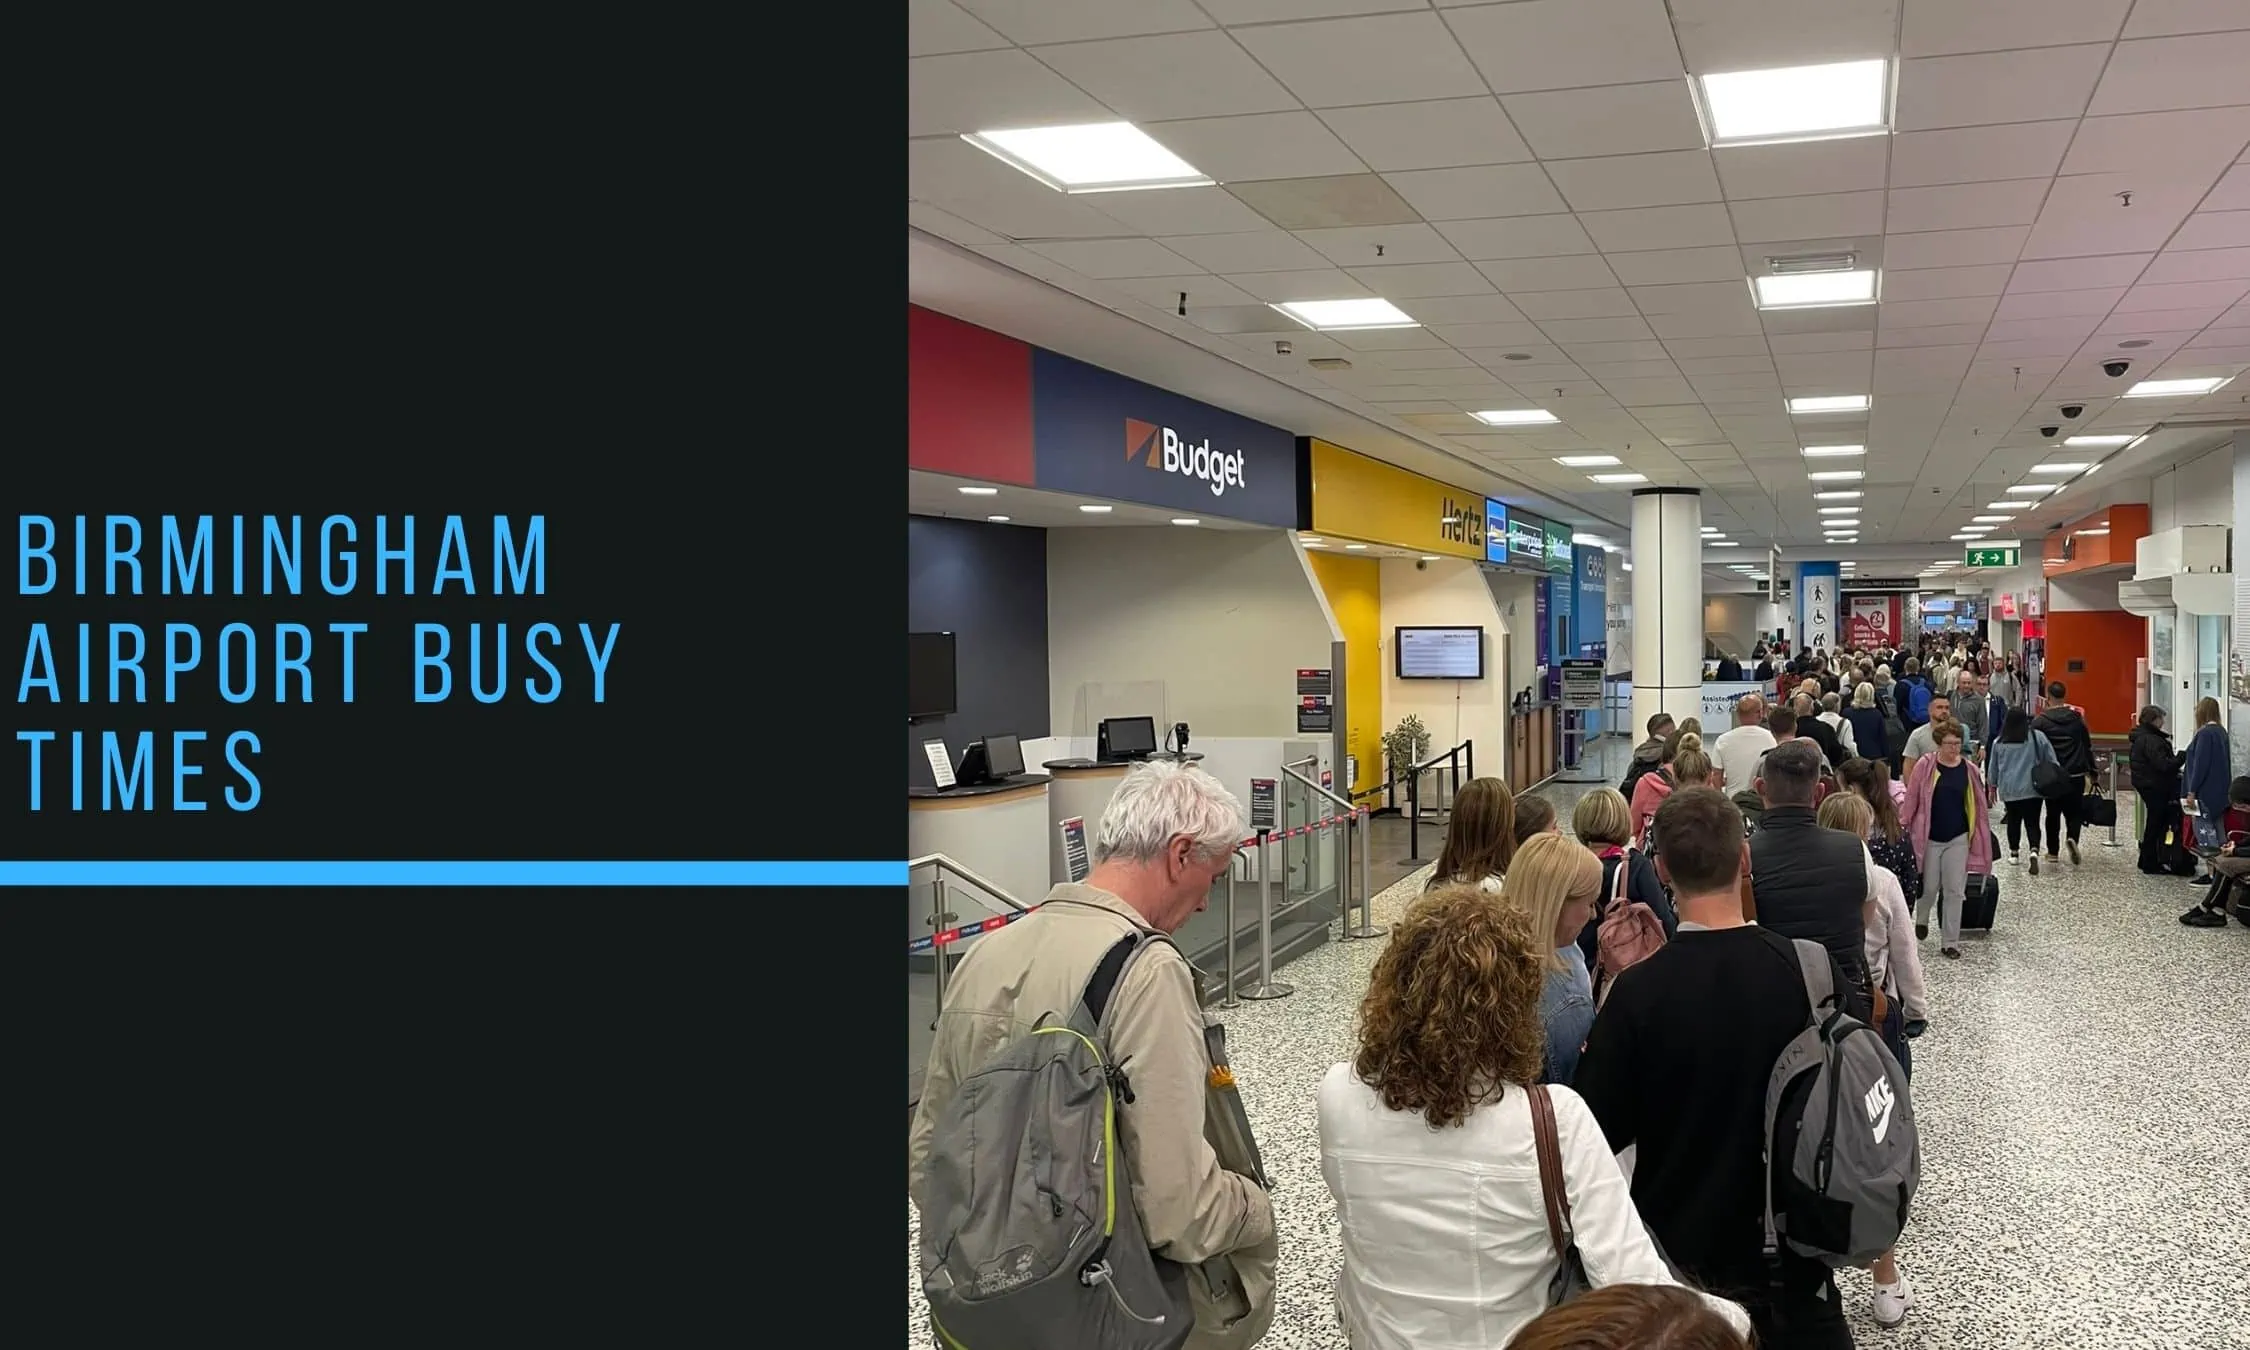 Birmingham Airport Busy Times: How big are the queues today?